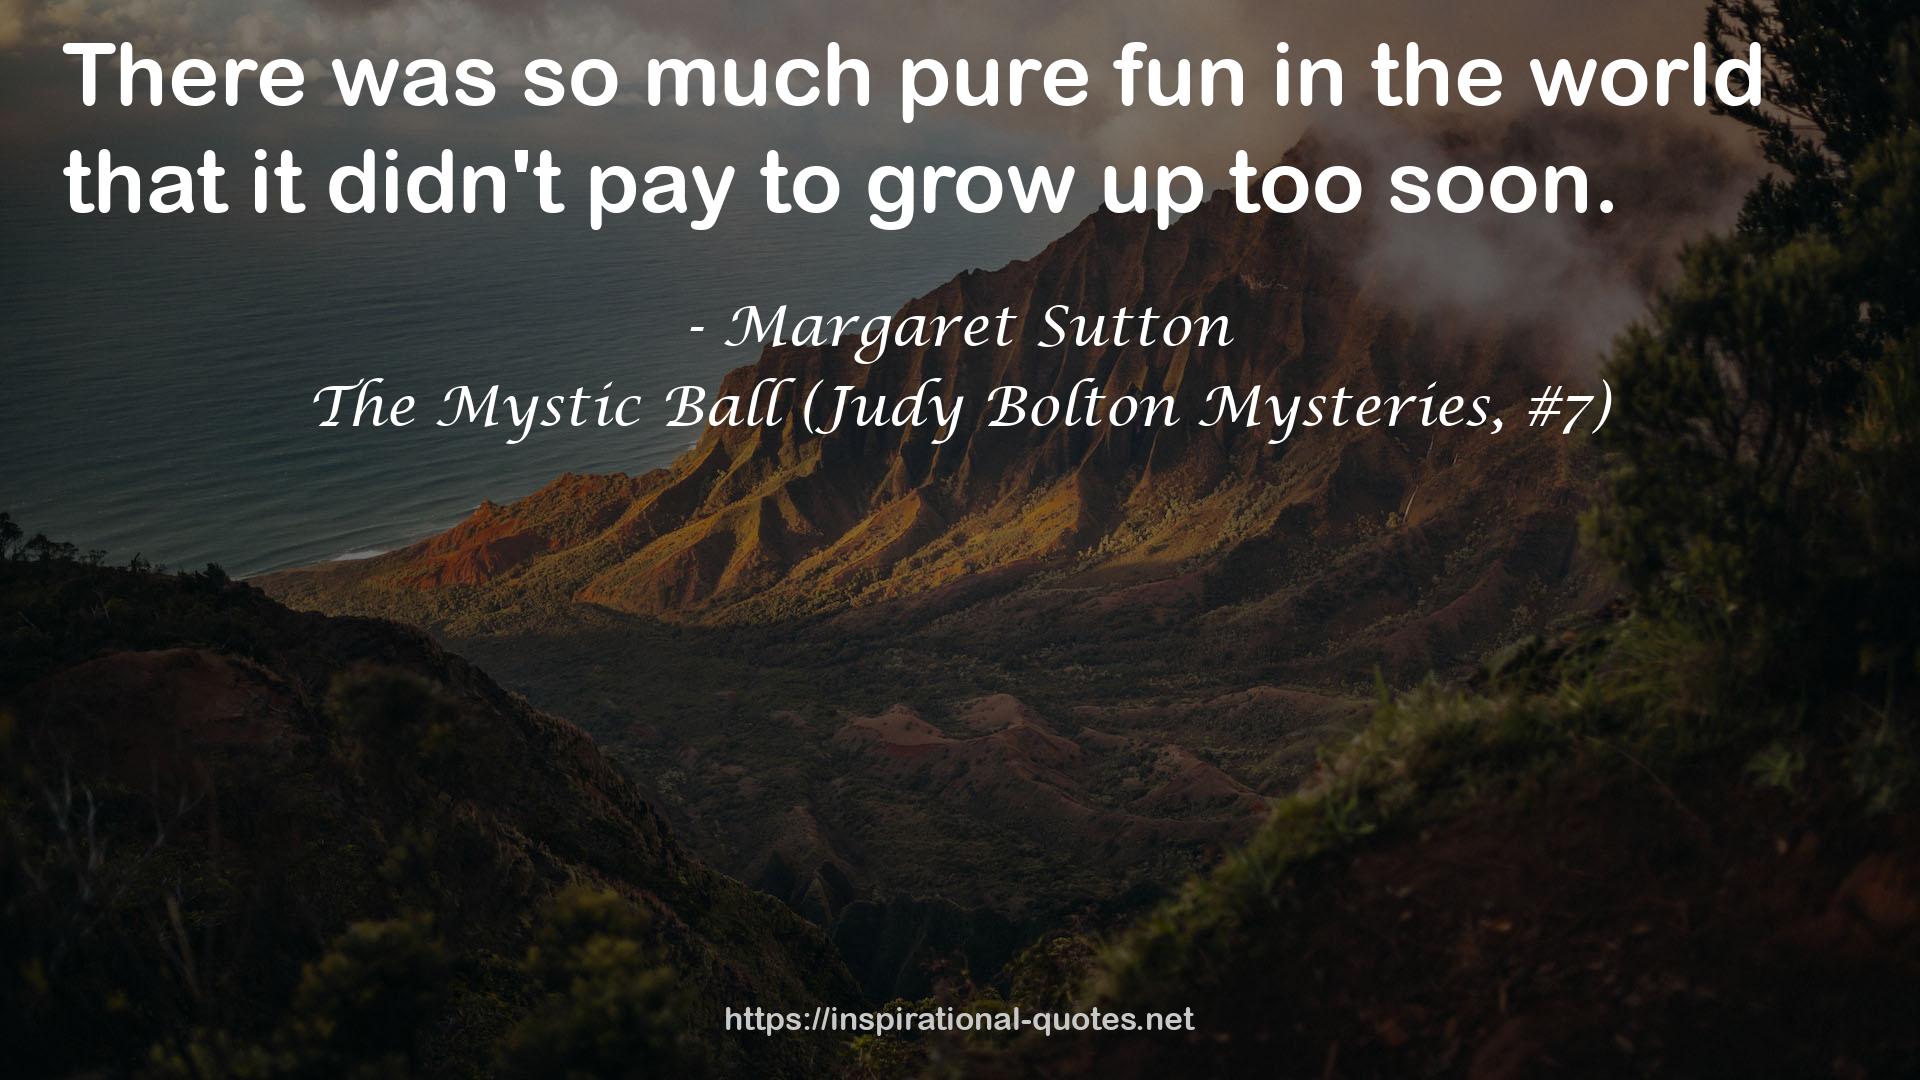 The Mystic Ball (Judy Bolton Mysteries, #7) QUOTES